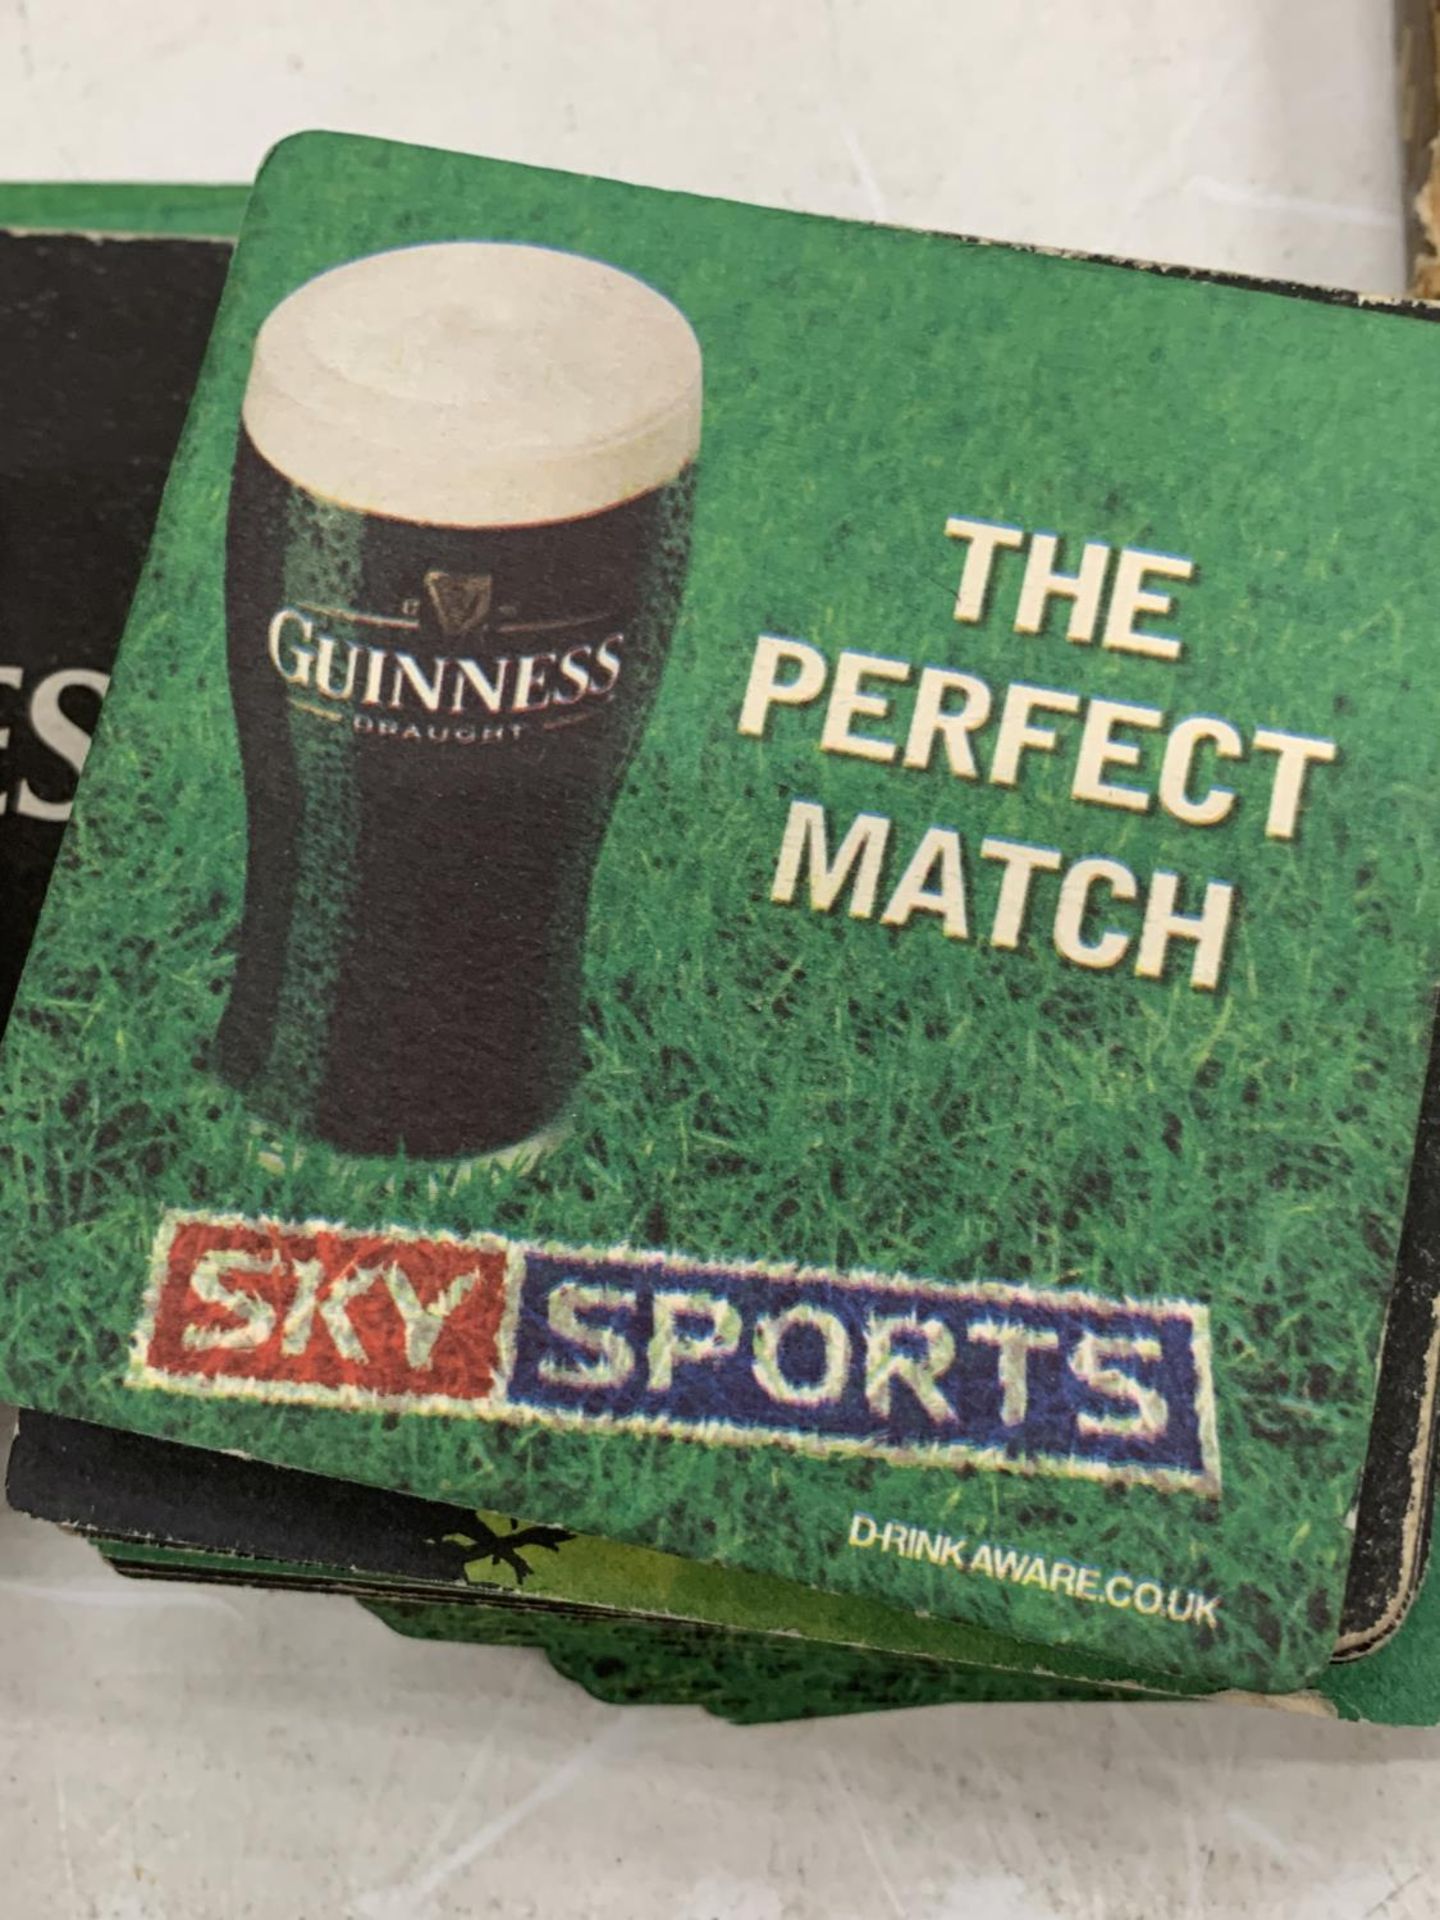 VARIOUS GUINNESS RELATED ITEMS - Image 3 of 4